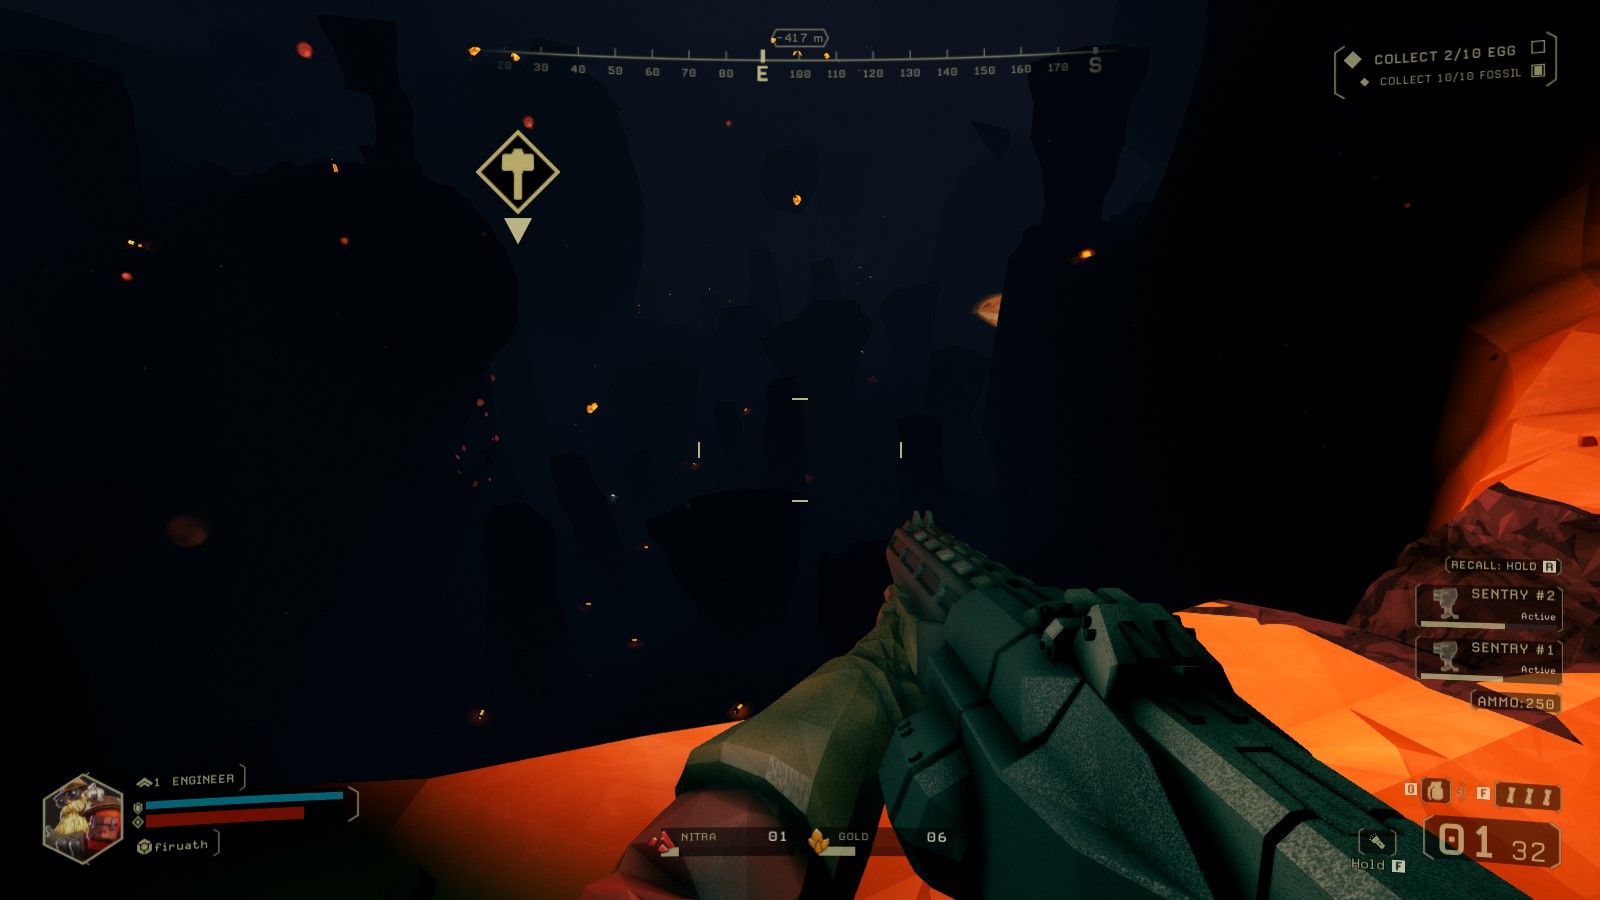 A player holds a shotgun on a precipice overlooking a dark abyss in Deep Rock Galactic